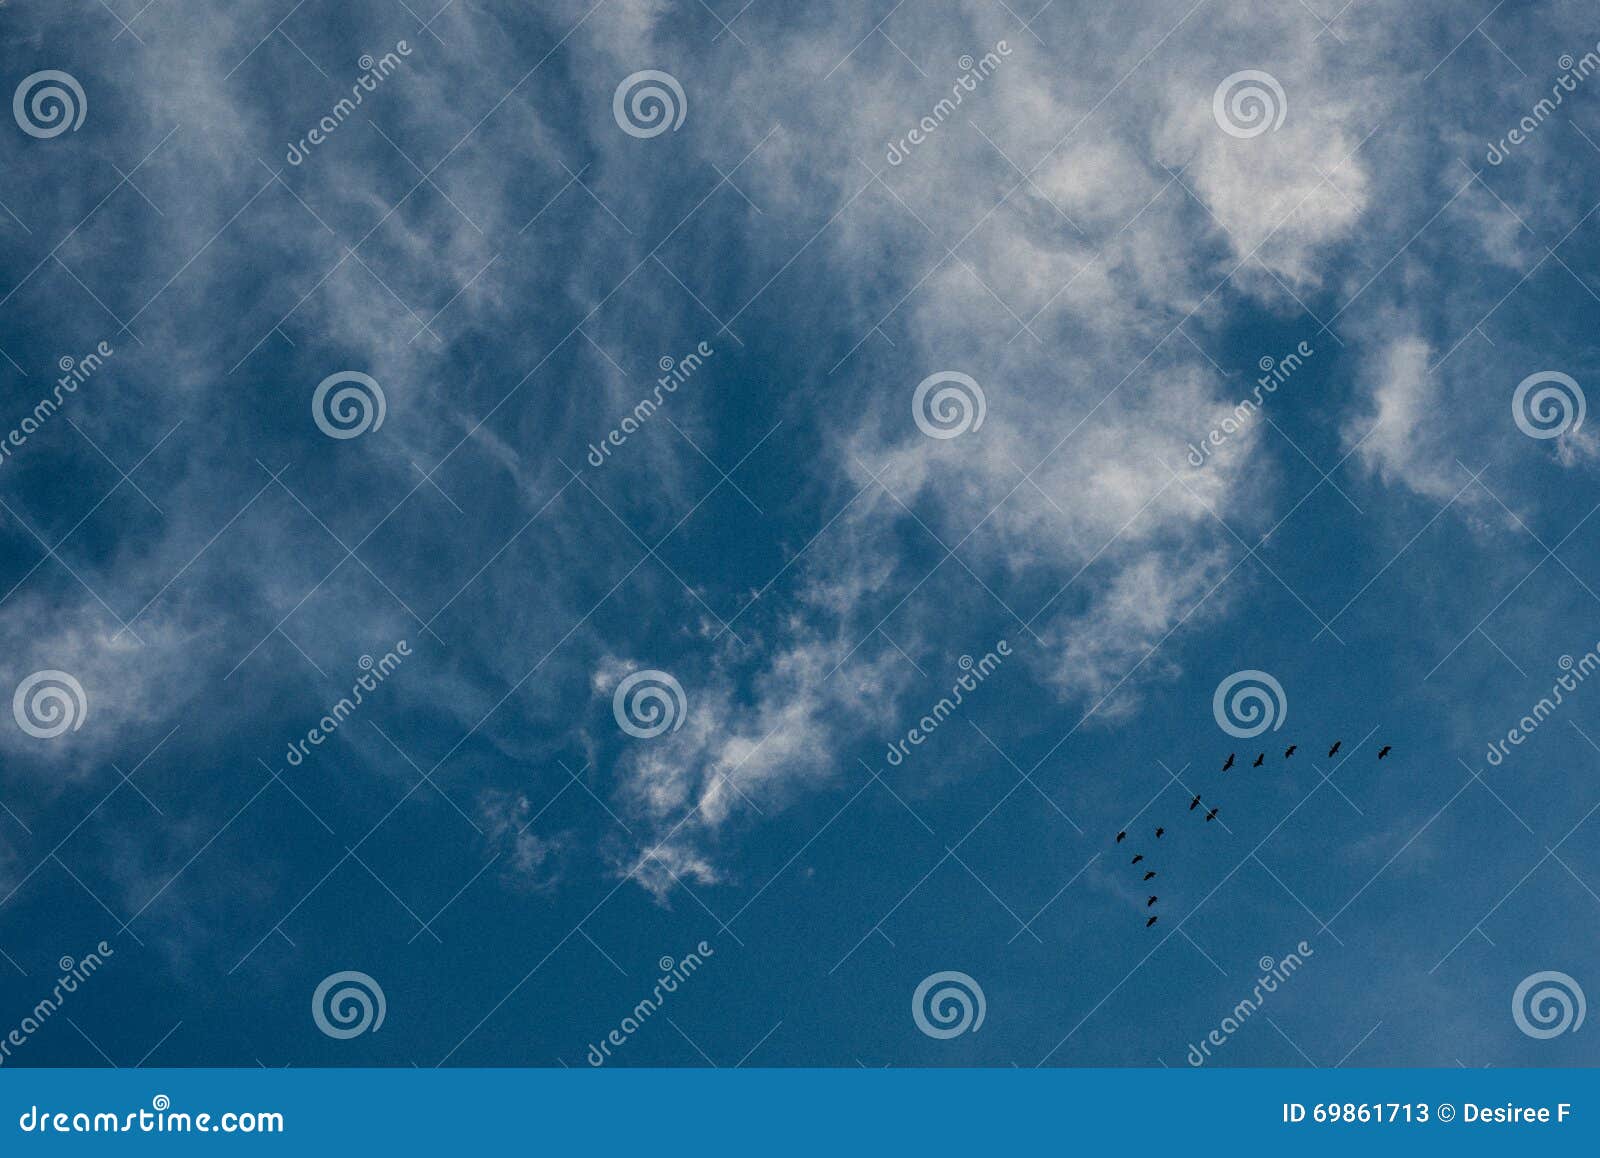 clouds and a blue sky with a bunch of flying birds